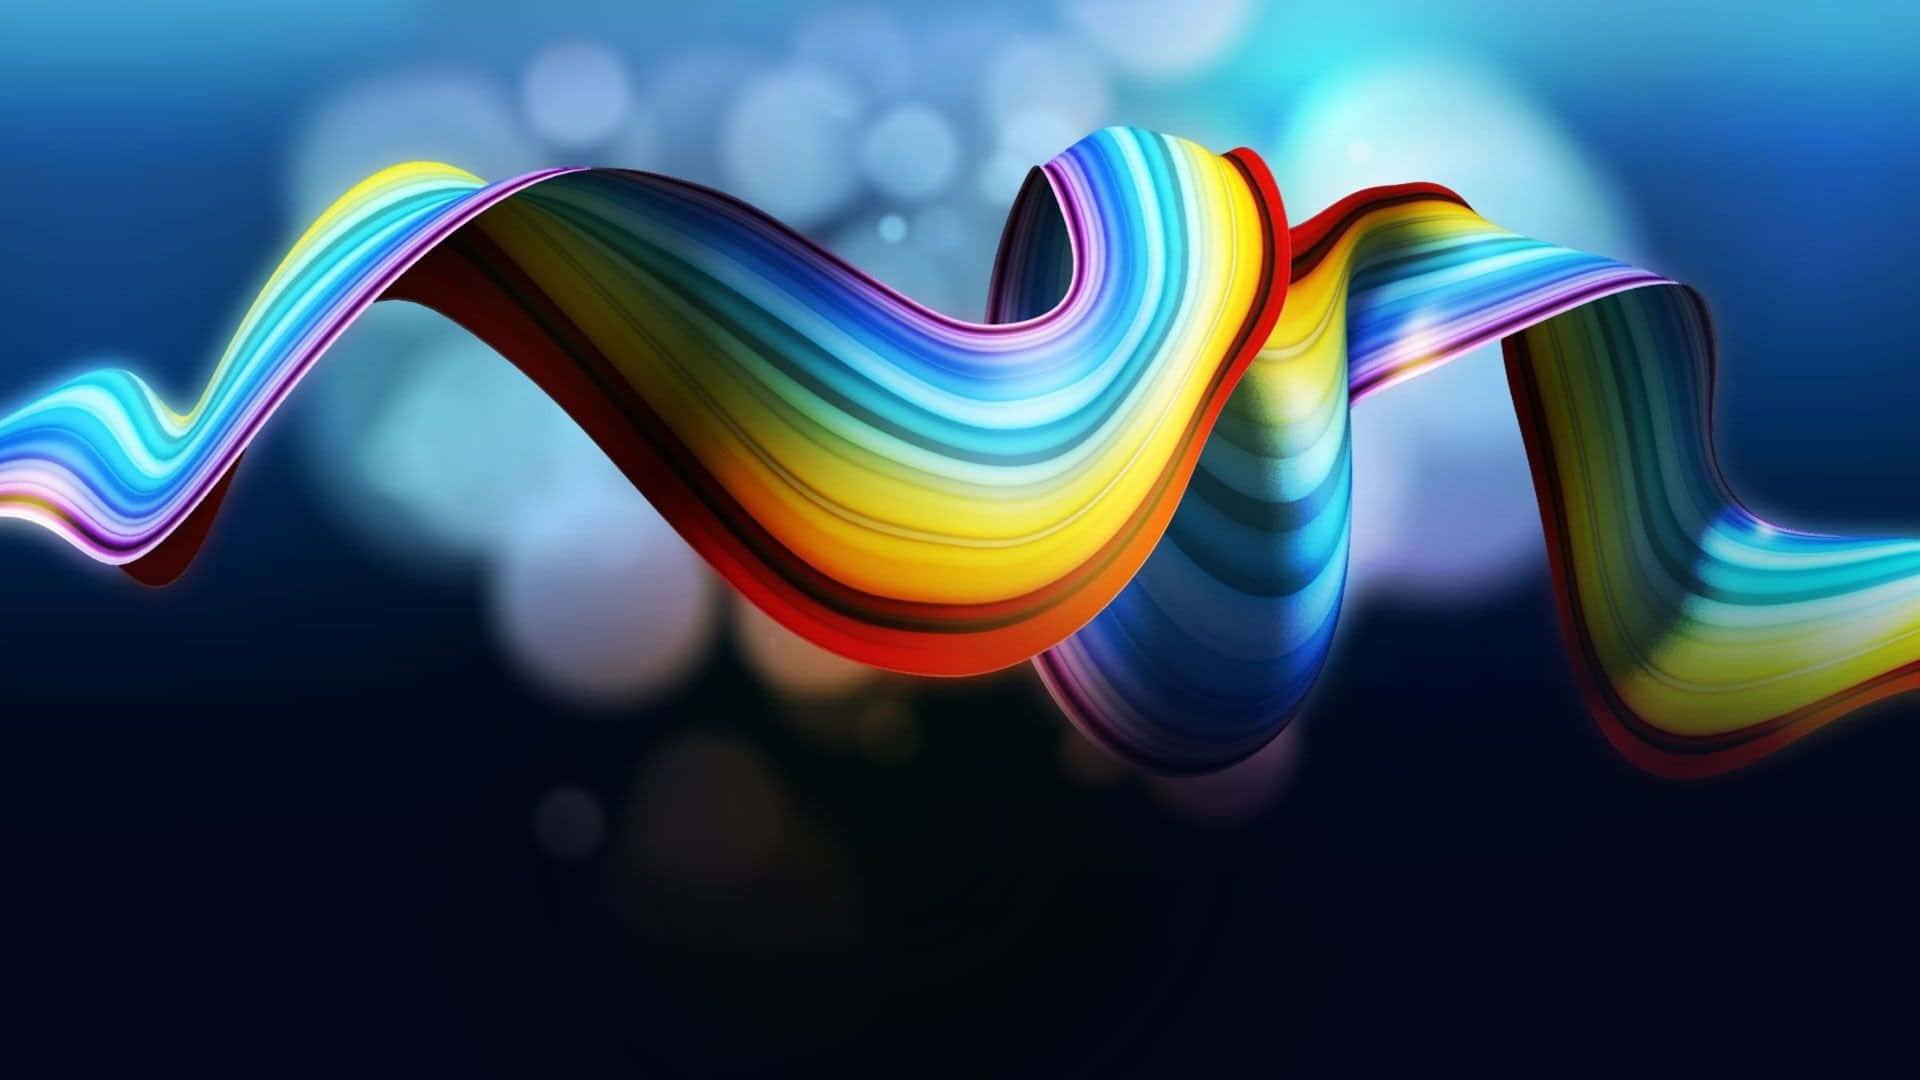 A Colorful Abstract Wave With A Dark Background Wallpaper